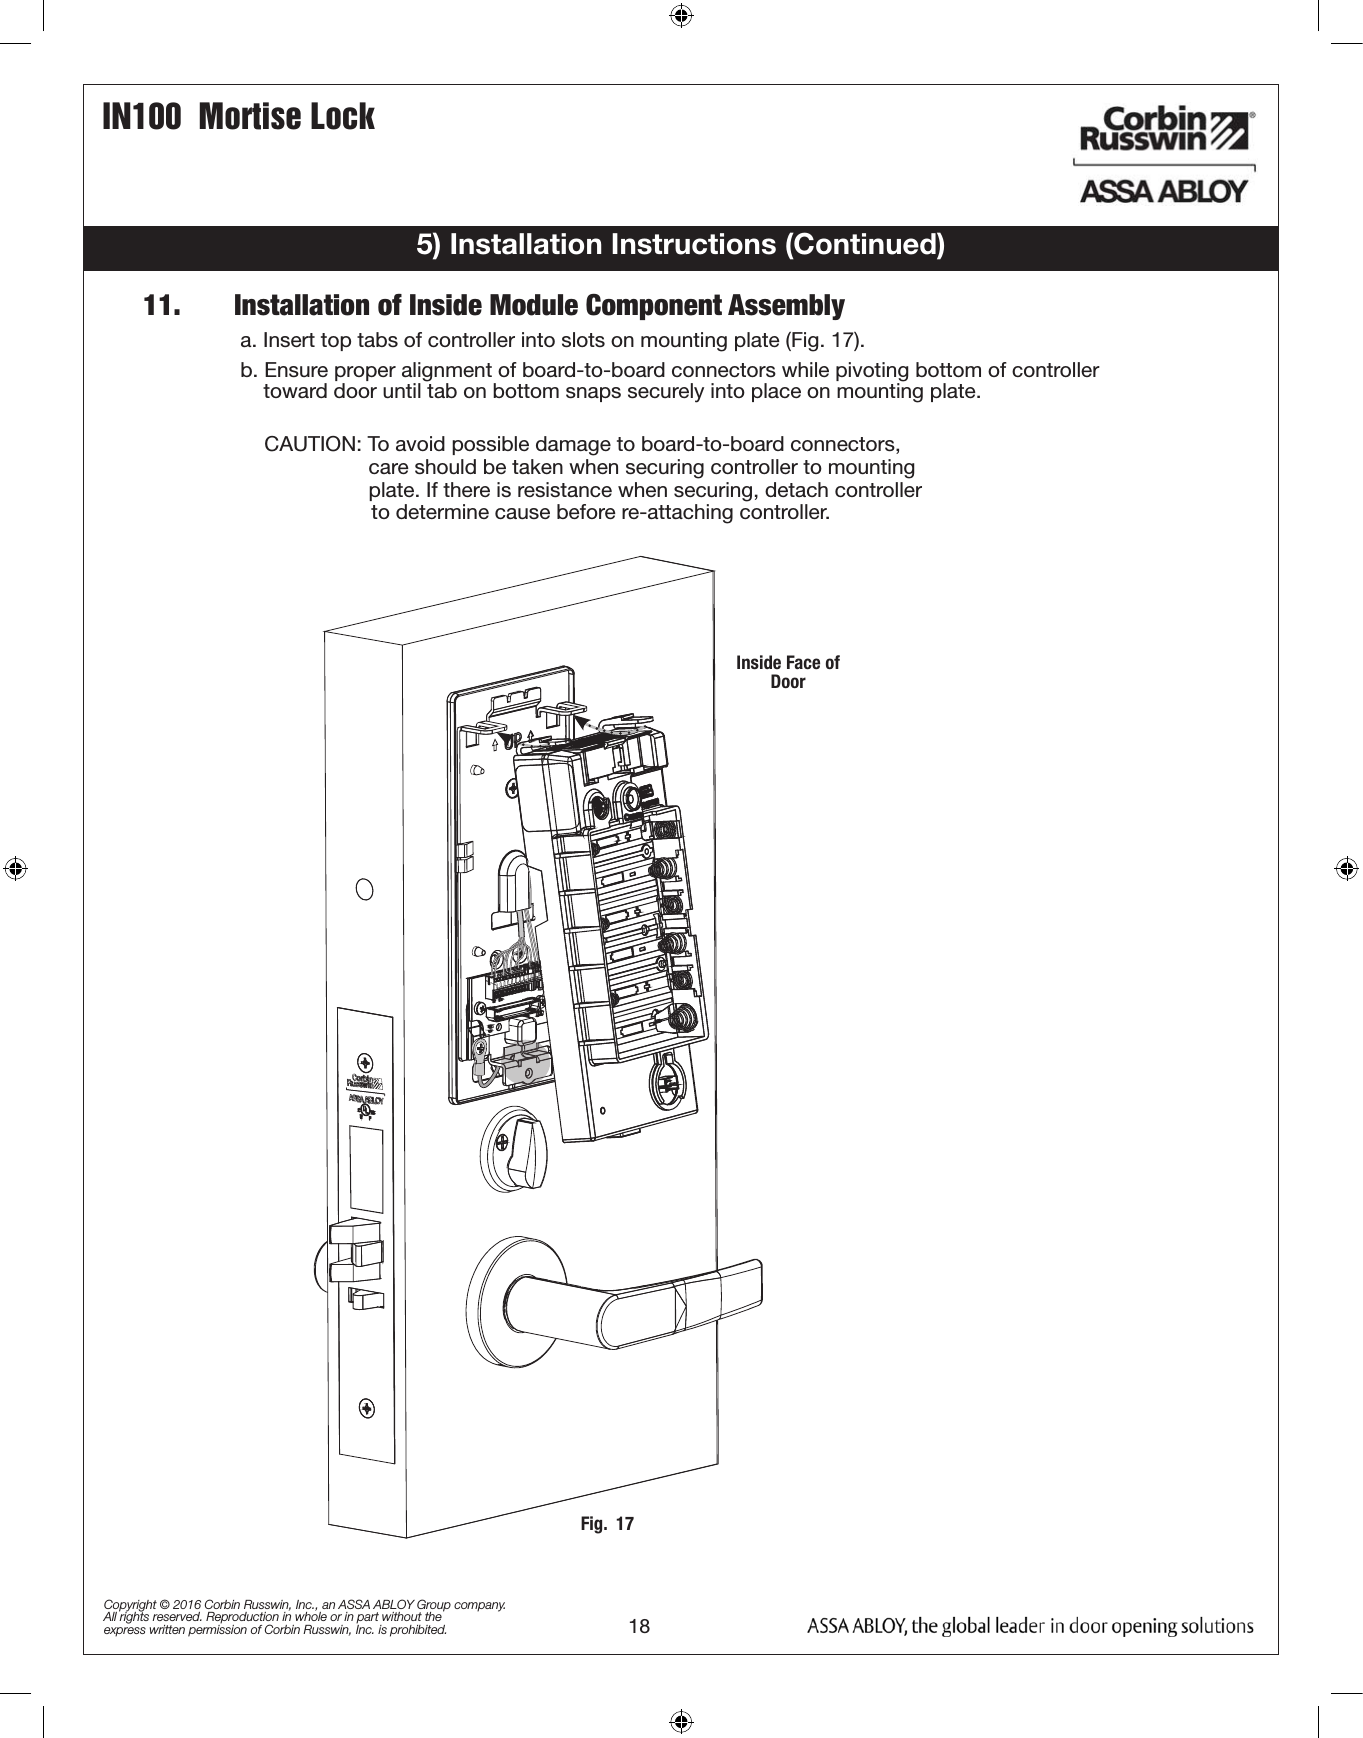 IN100  Mortise Lock18Copyright © 2016 Corbin Russwin, Inc., an ASSA ABLOY Group company. All rights reserved. Reproduction in whole or in part without the express written permission of Corbin Russwin, Inc. is prohibited.5) Installation Instructions (Continued)11.       Installation of Inside Module Component Assemblya. Insert top tabs of controller into slots on mounting plate (Fig. 17).b. Ensure proper alignment of board-to-board connectors while pivoting bottom of controller            toward door until tab on bottom snaps securely into place on mounting plate.  CAUTION: To avoid possible damage to board-to-board connectors,                    care should be taken when securing controller to mounting                    plate. If there is resistance when securing, detach controller                  to determine cause before re-attaching controller.Fig.  17Inside Face of Door